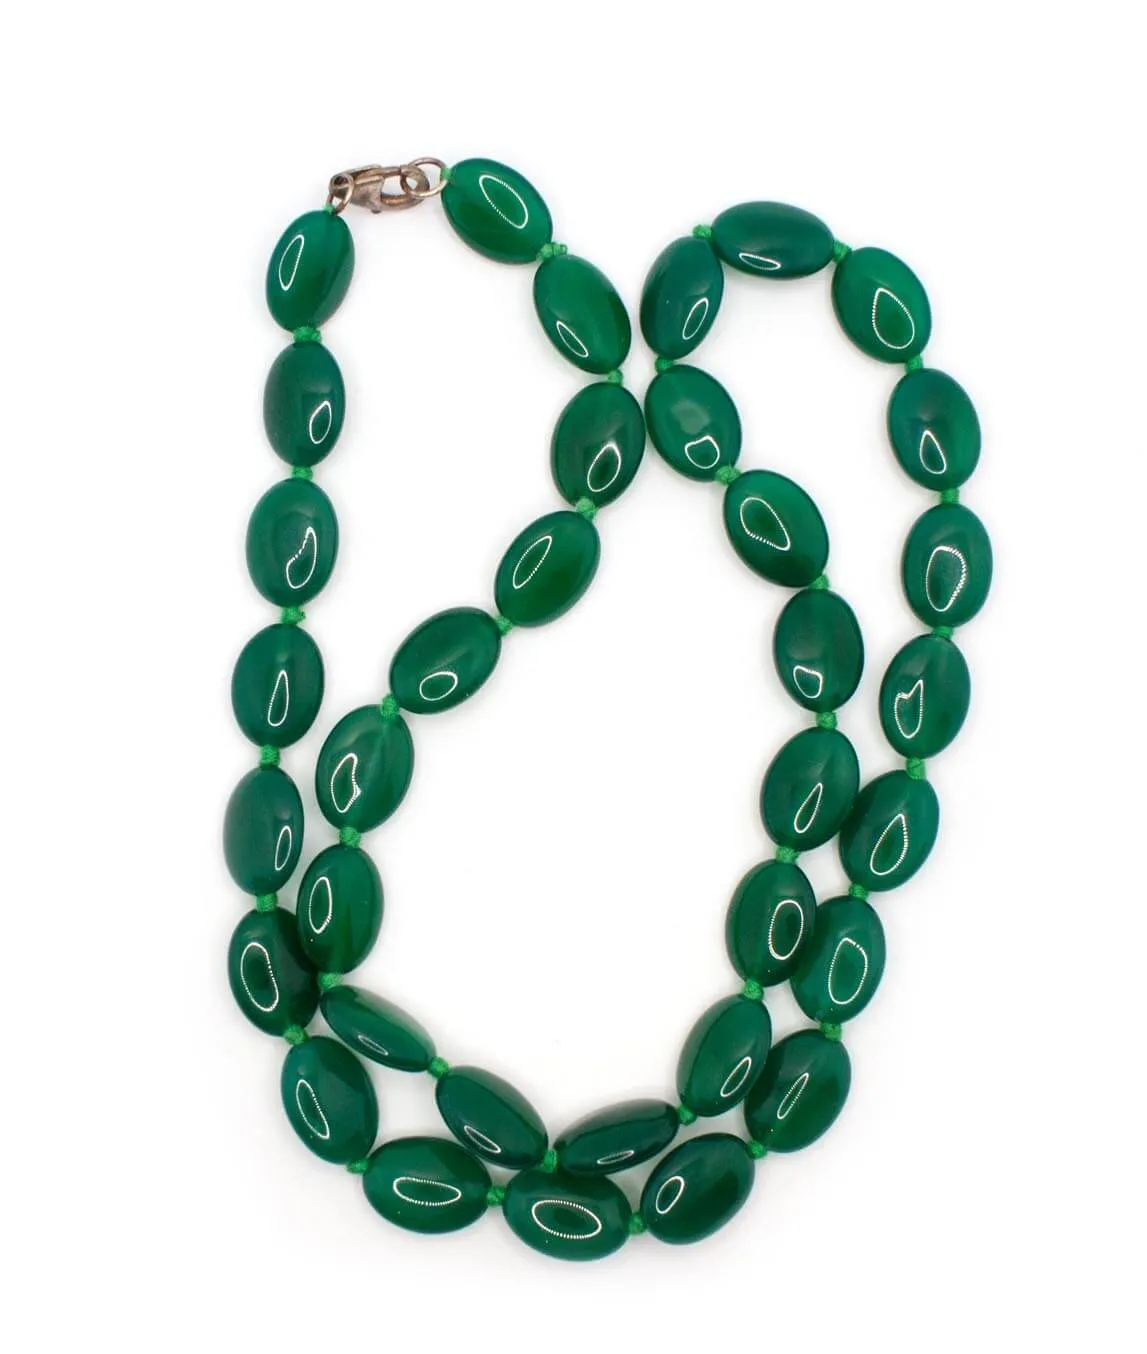 Vintage 1930s green glass bead necklace